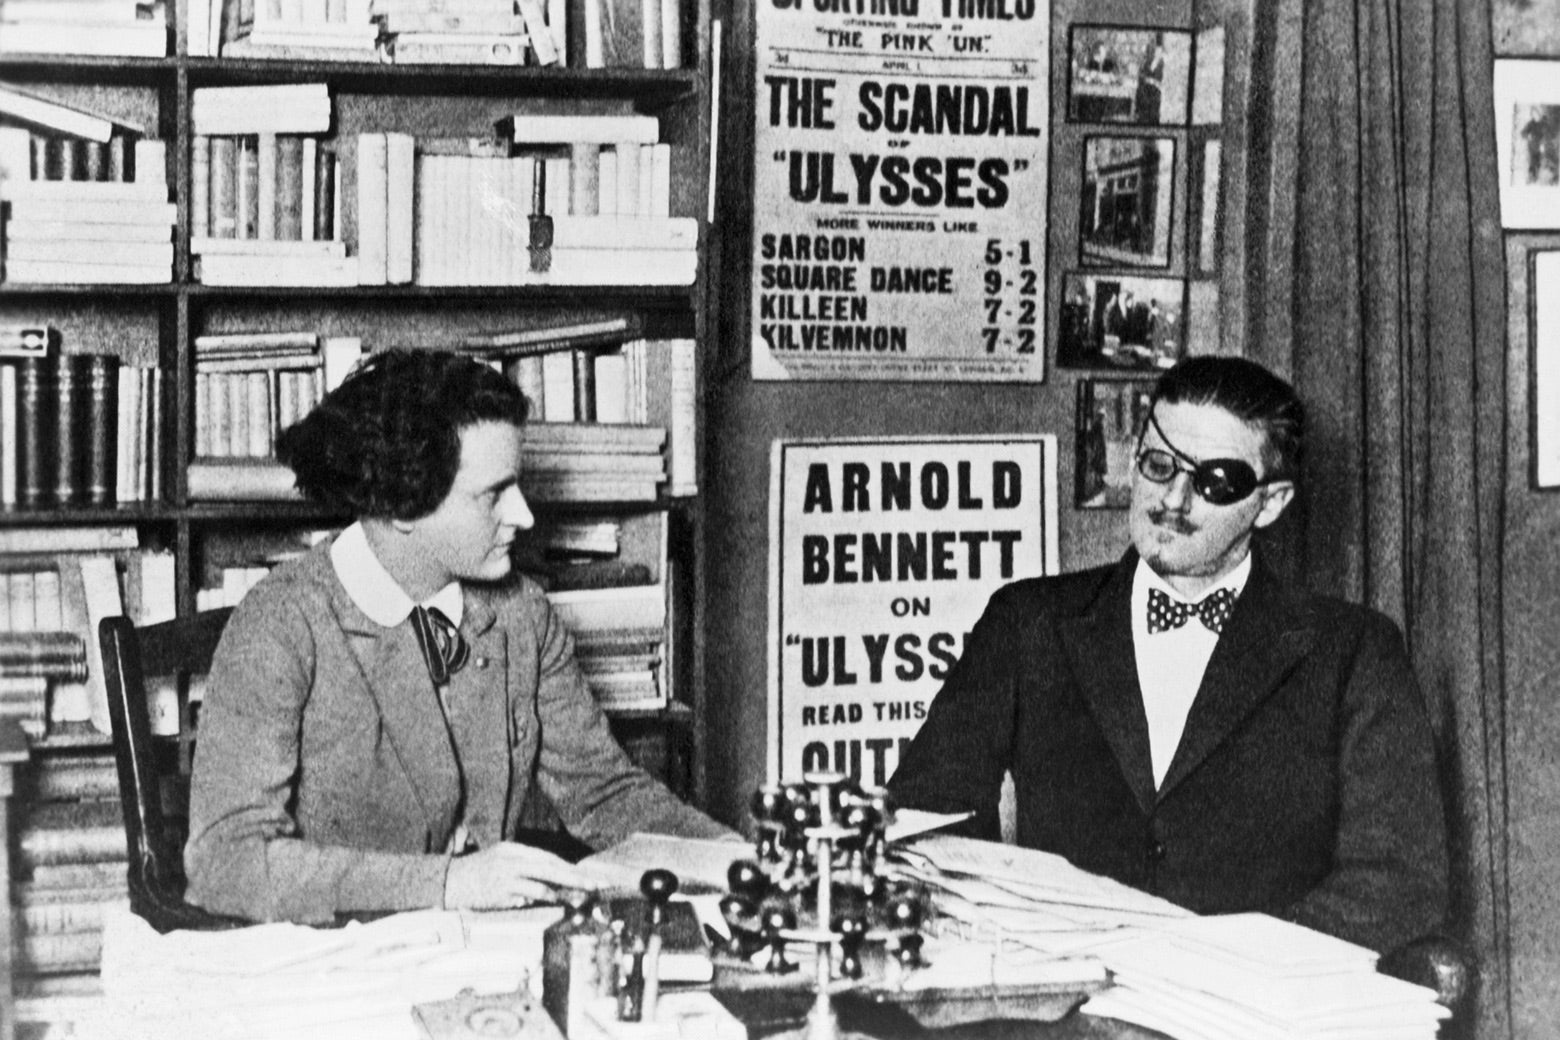 A black-and-white photo of Joyce and Beach sitting at a table in a cluttered office with bookshelves lining the walls. Joyce is wearing an eye patch.